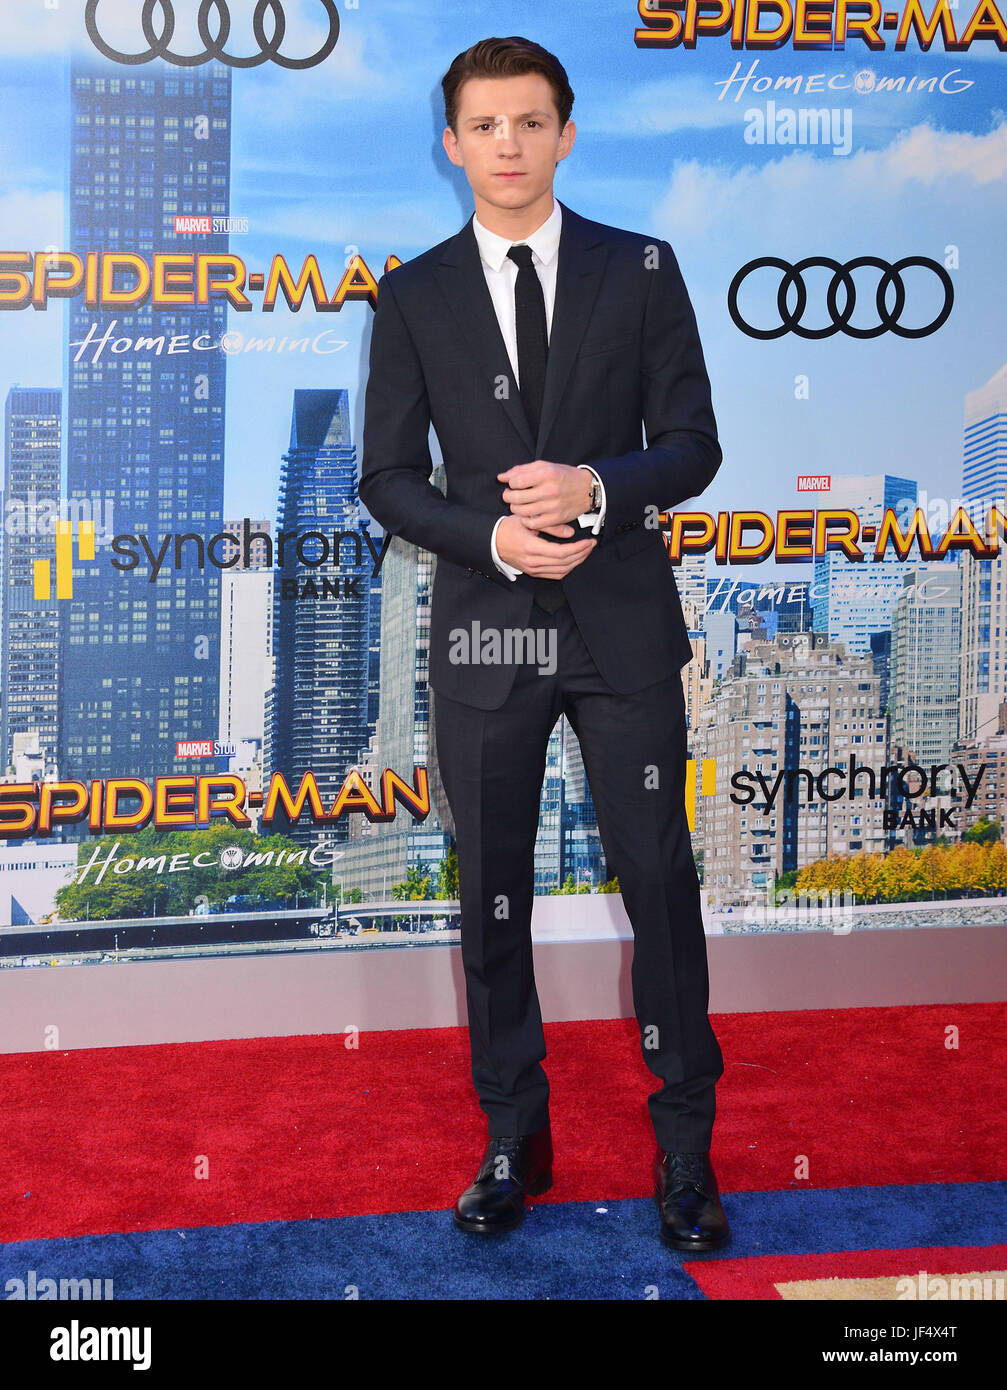 Hollywood, California, USA. 28th June, 2017. a  Tom Holland 006 arrives at the Premiere Of Columbia Pictures' 'Spider-Man: Homecoming' at TCL Chinese Theatre on June 28, 2017 in Hollywood, California Credit: Tsuni / USA/Alamy Live News Stock Photo